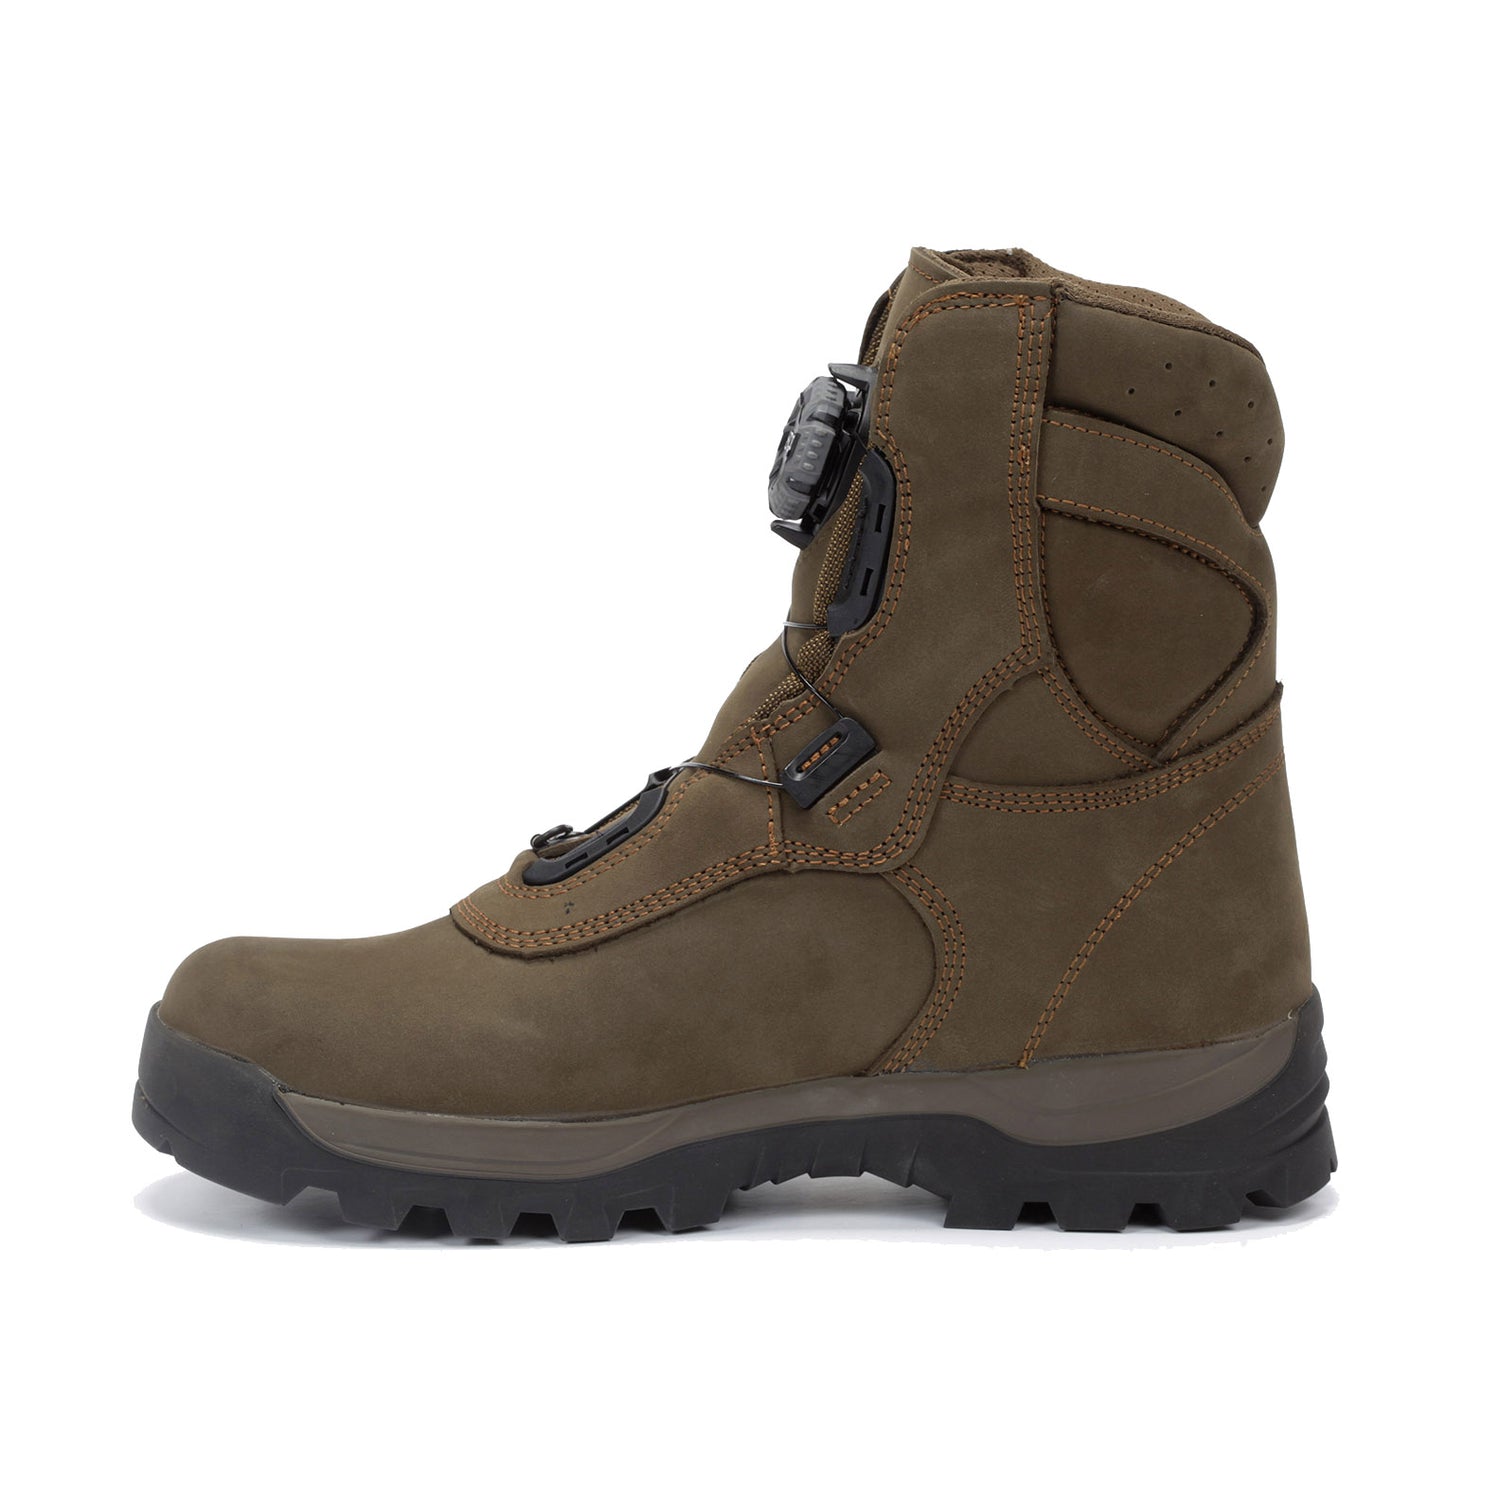 Chiruca Bulldog GORE-TEX Hiking Boots New Forest Clothing